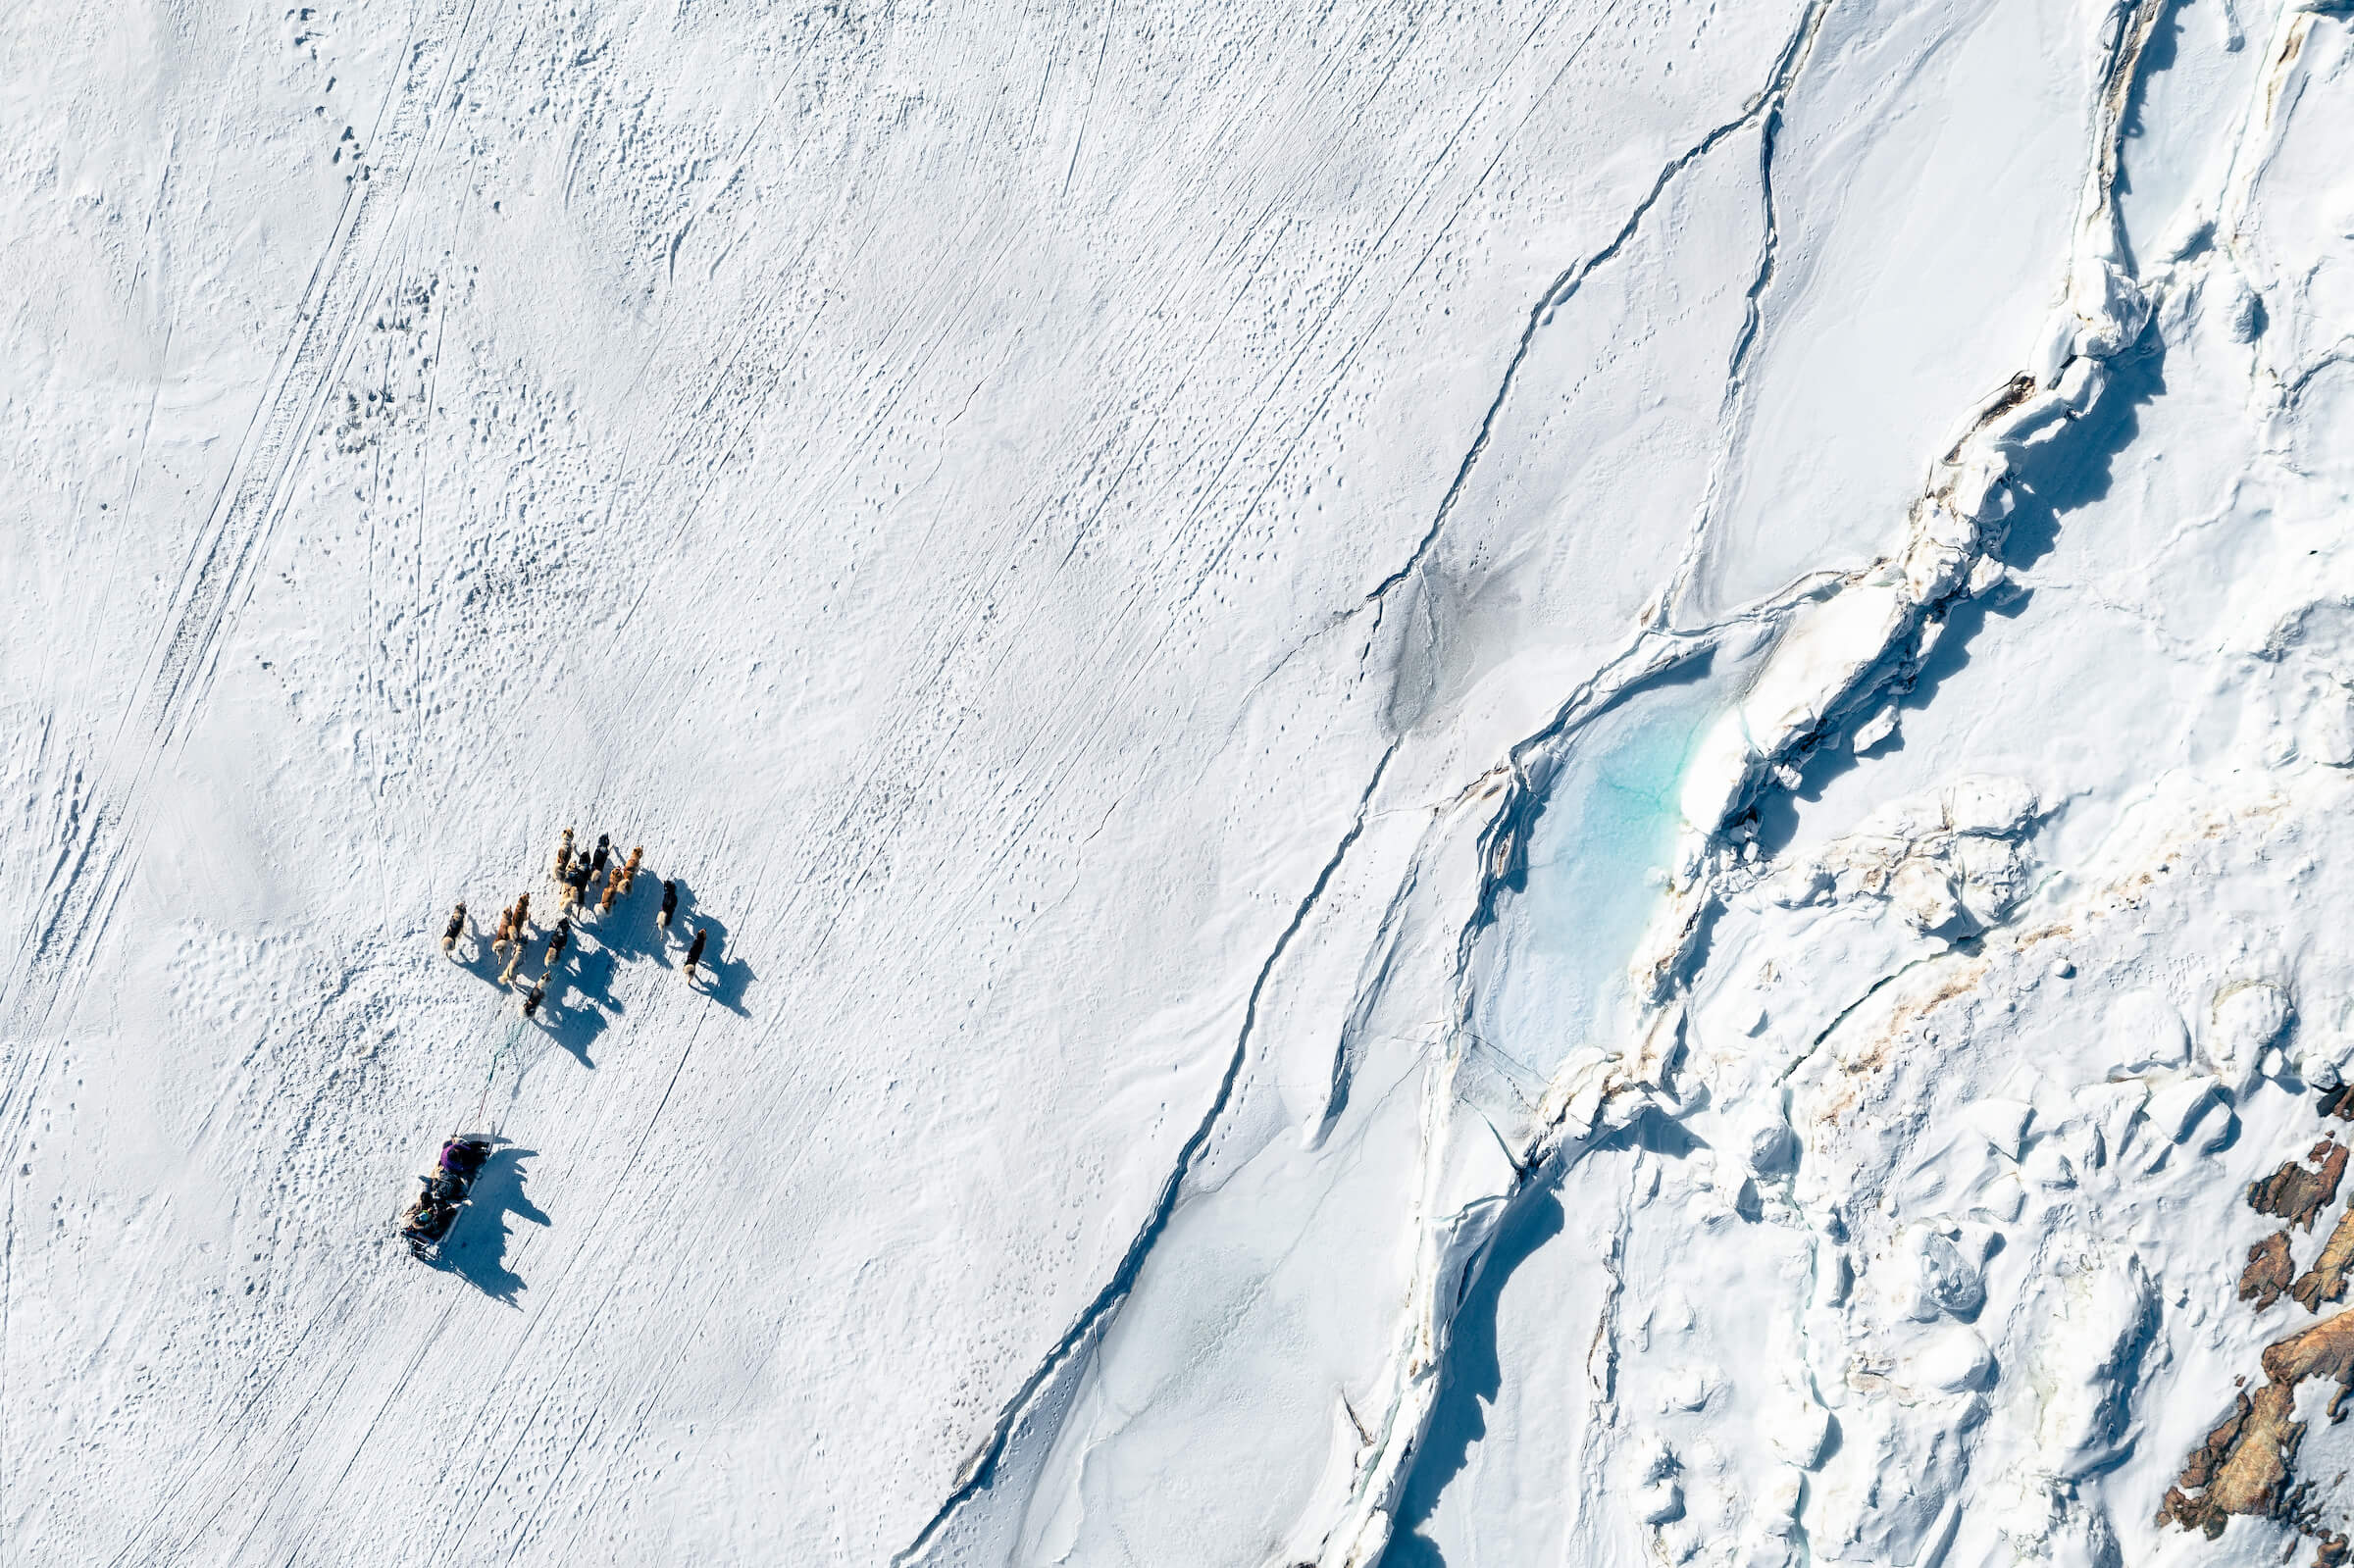 Aerial view of sled dogs riding next to interesting features in the terrain - Photo by Alex Savu - Visit Greenland